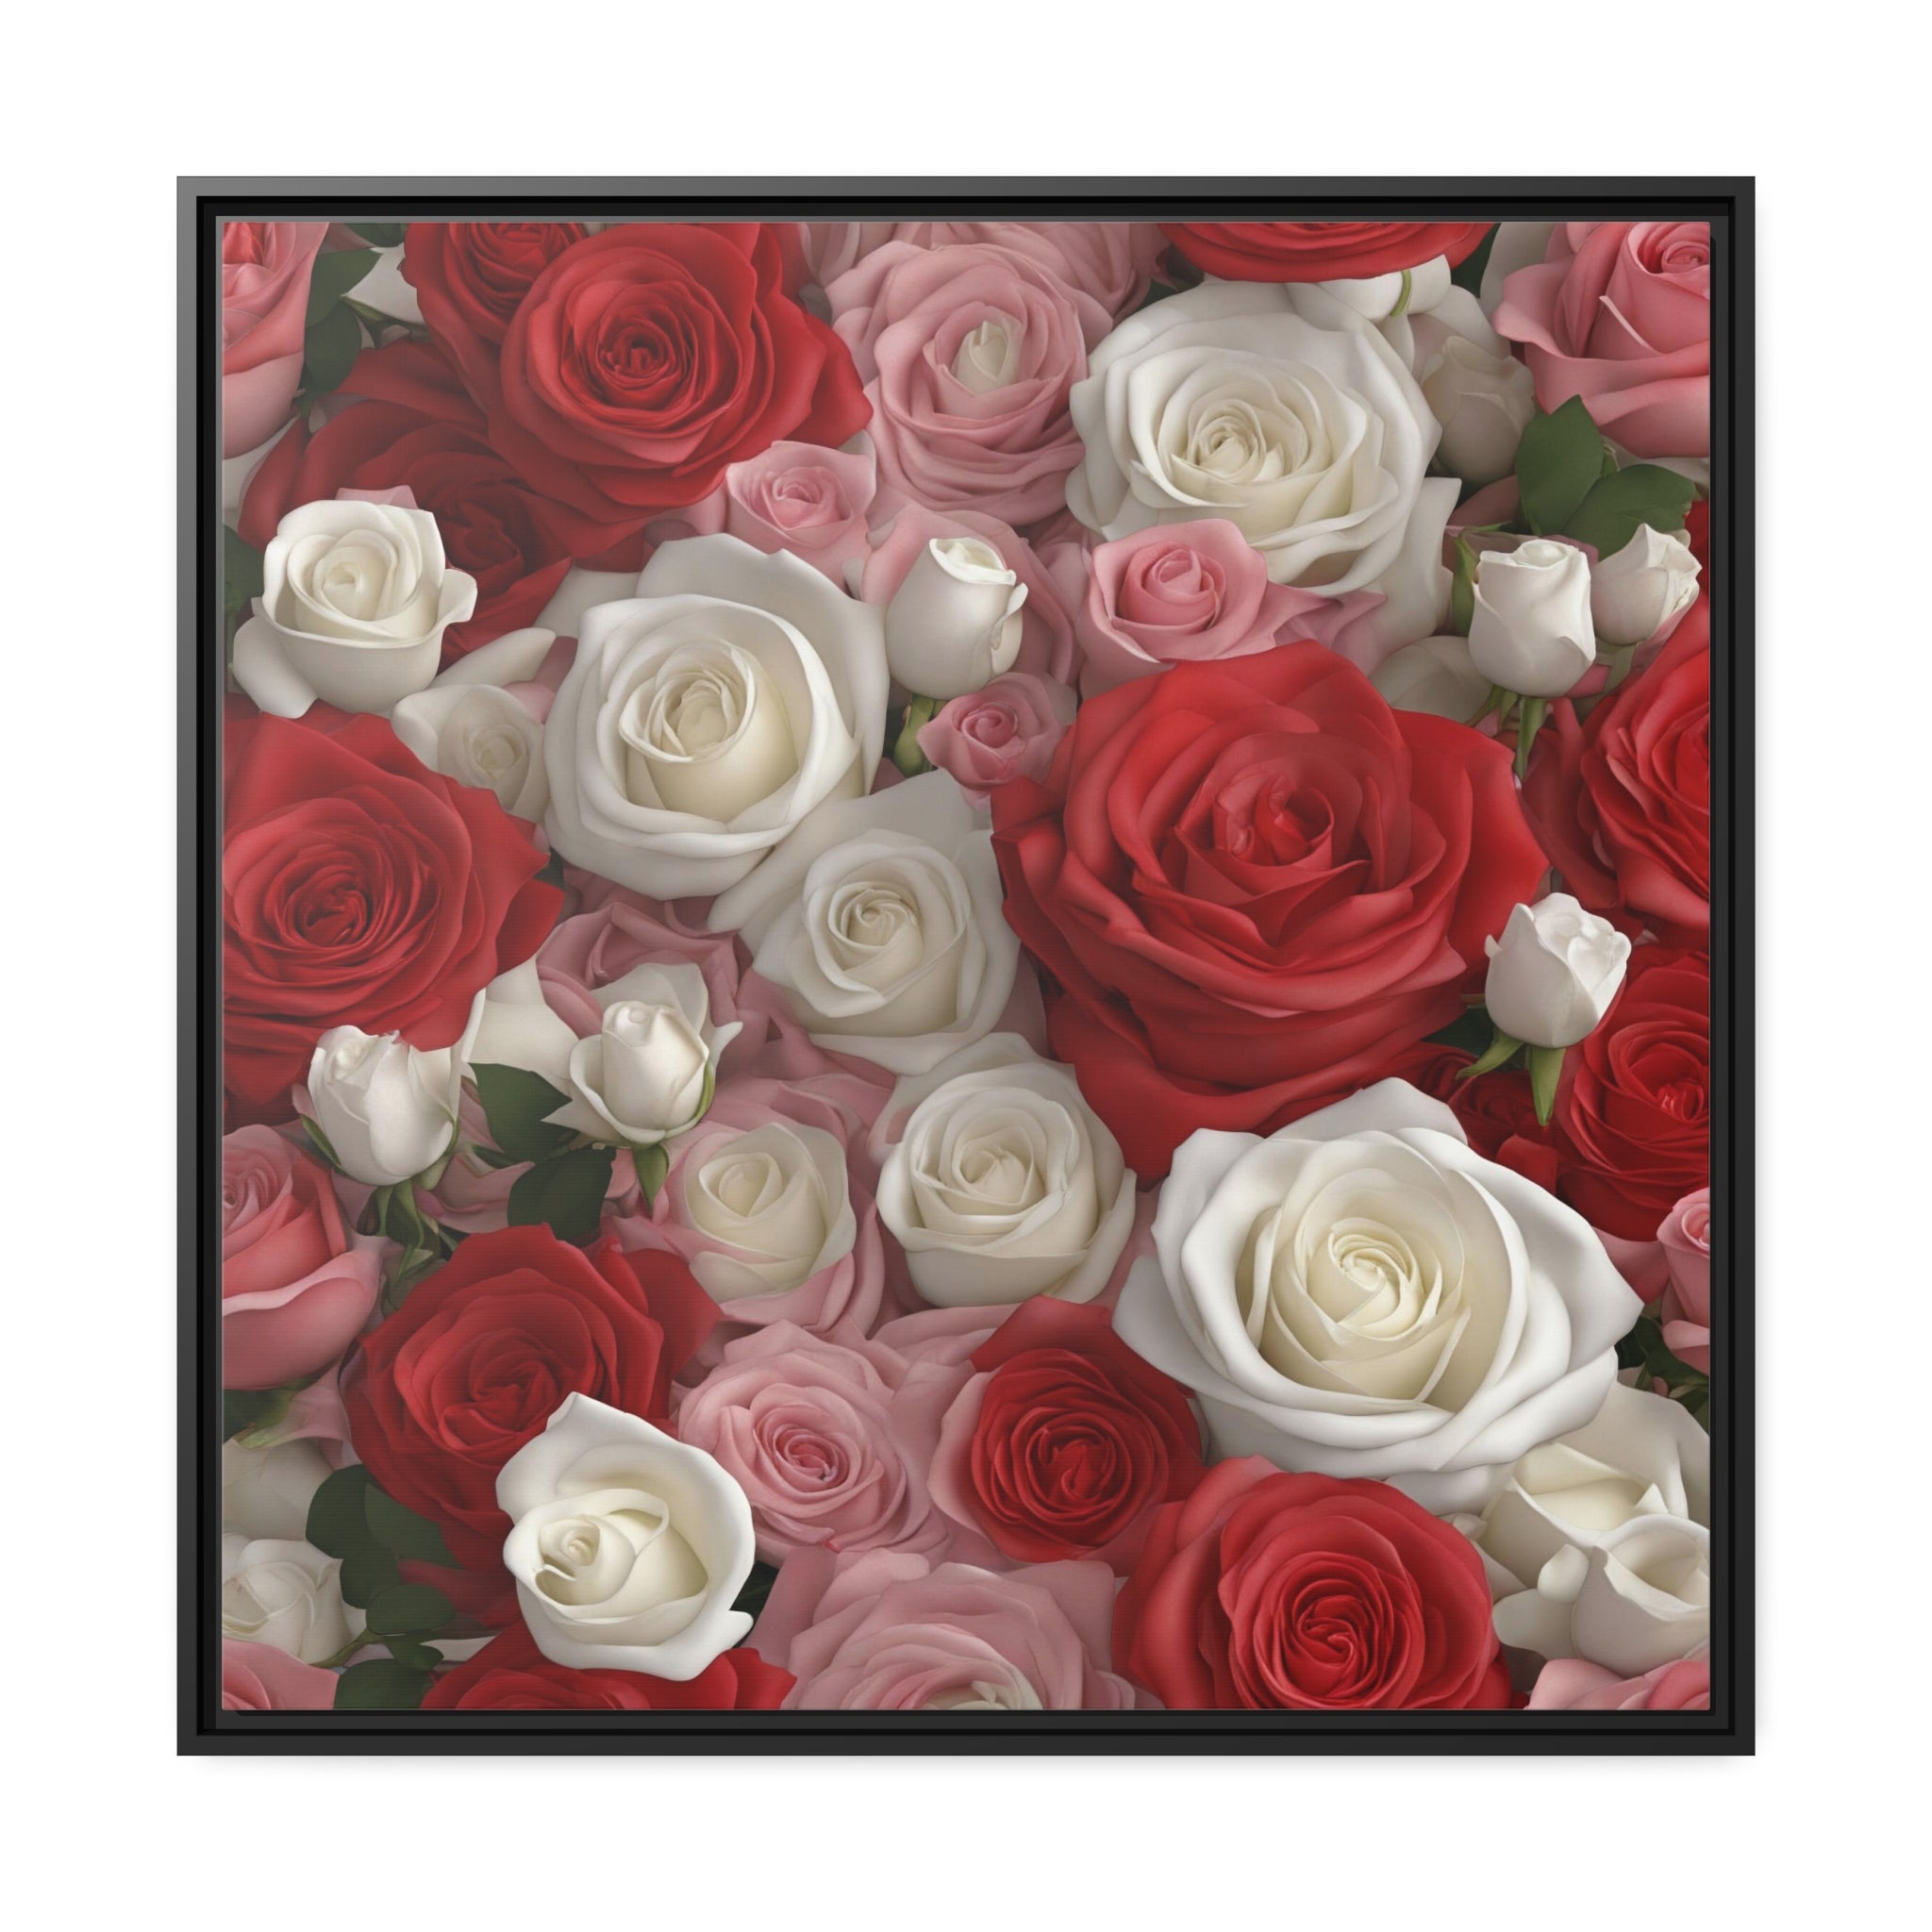 Wall Art ROSES Canvas Print Art Deco Painting Original Giclee 32X32 + Frame Love Flower Minimalist Beauty Fun Design Fit House Home Office Gift Ready Hang